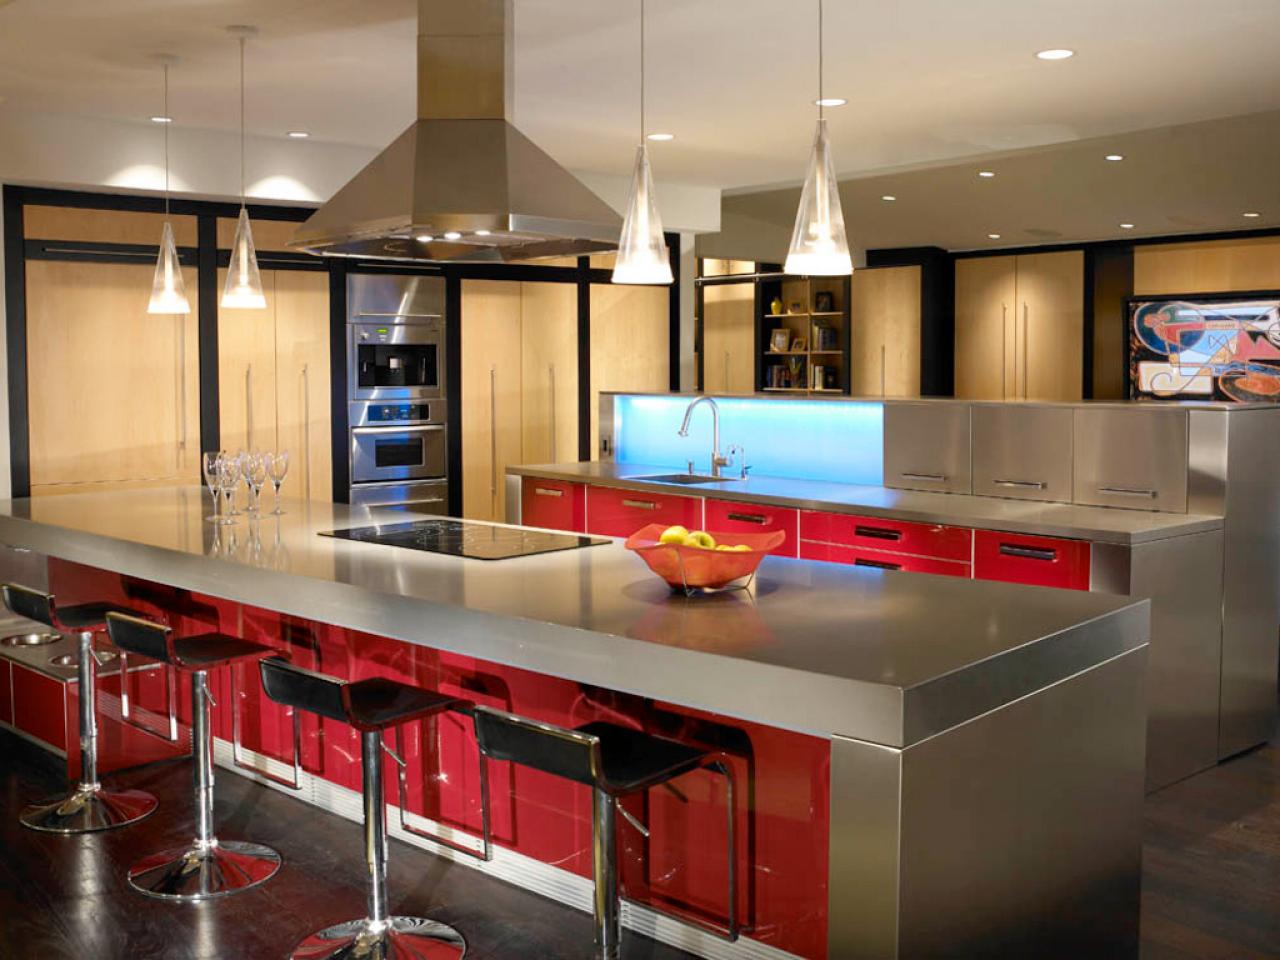 Stainless Steel Countertops Pictures Ideas From Hgtv Hgtv